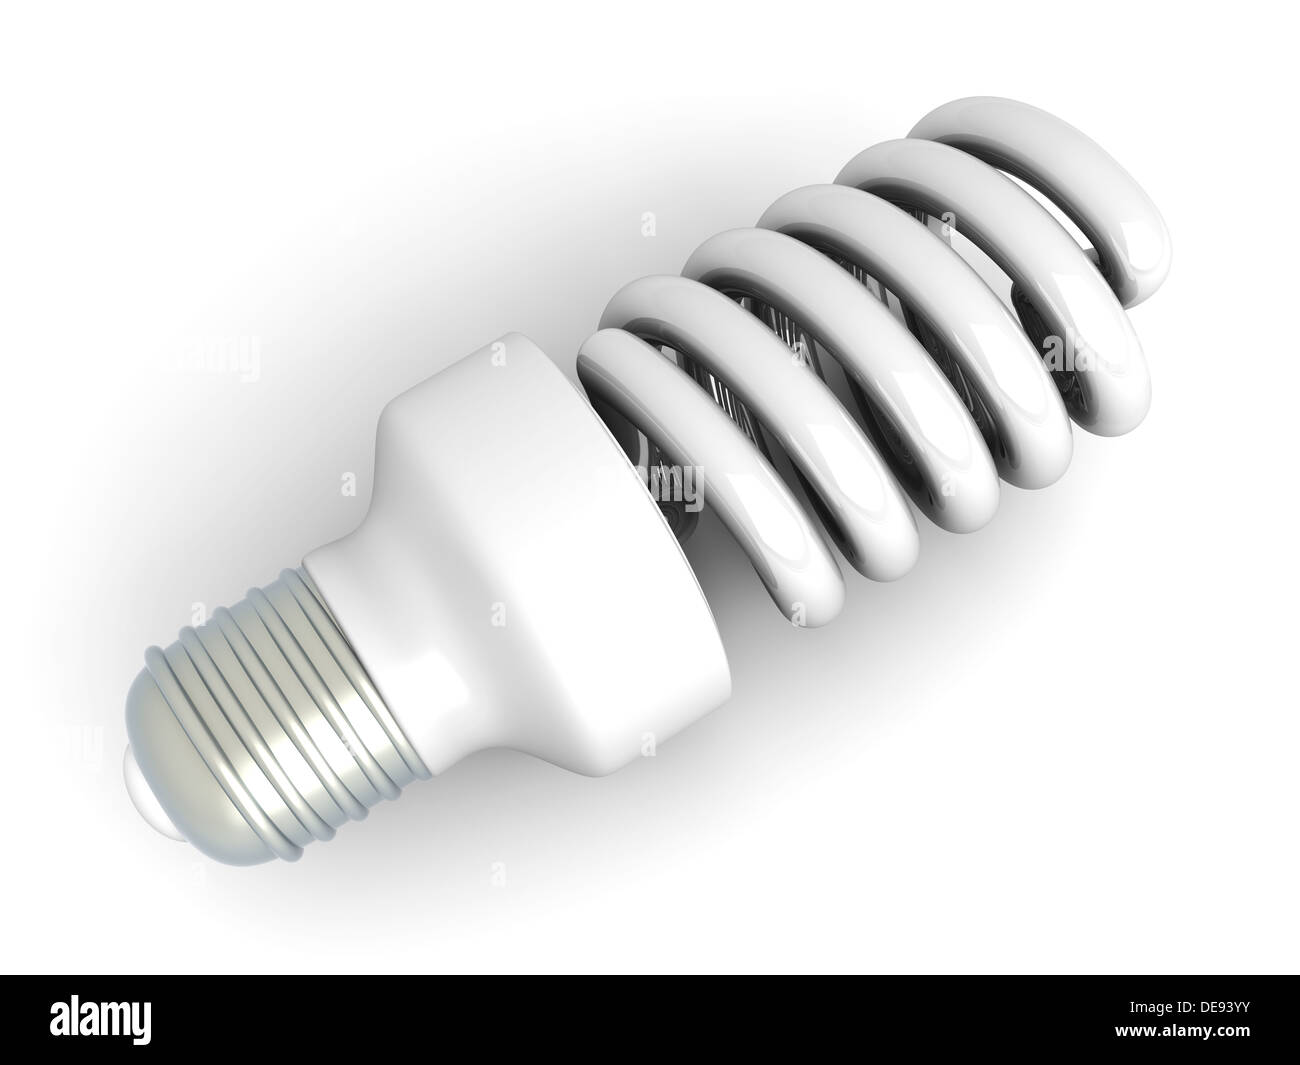 3D rendered Illustration. Isolated on white. Stock Photo